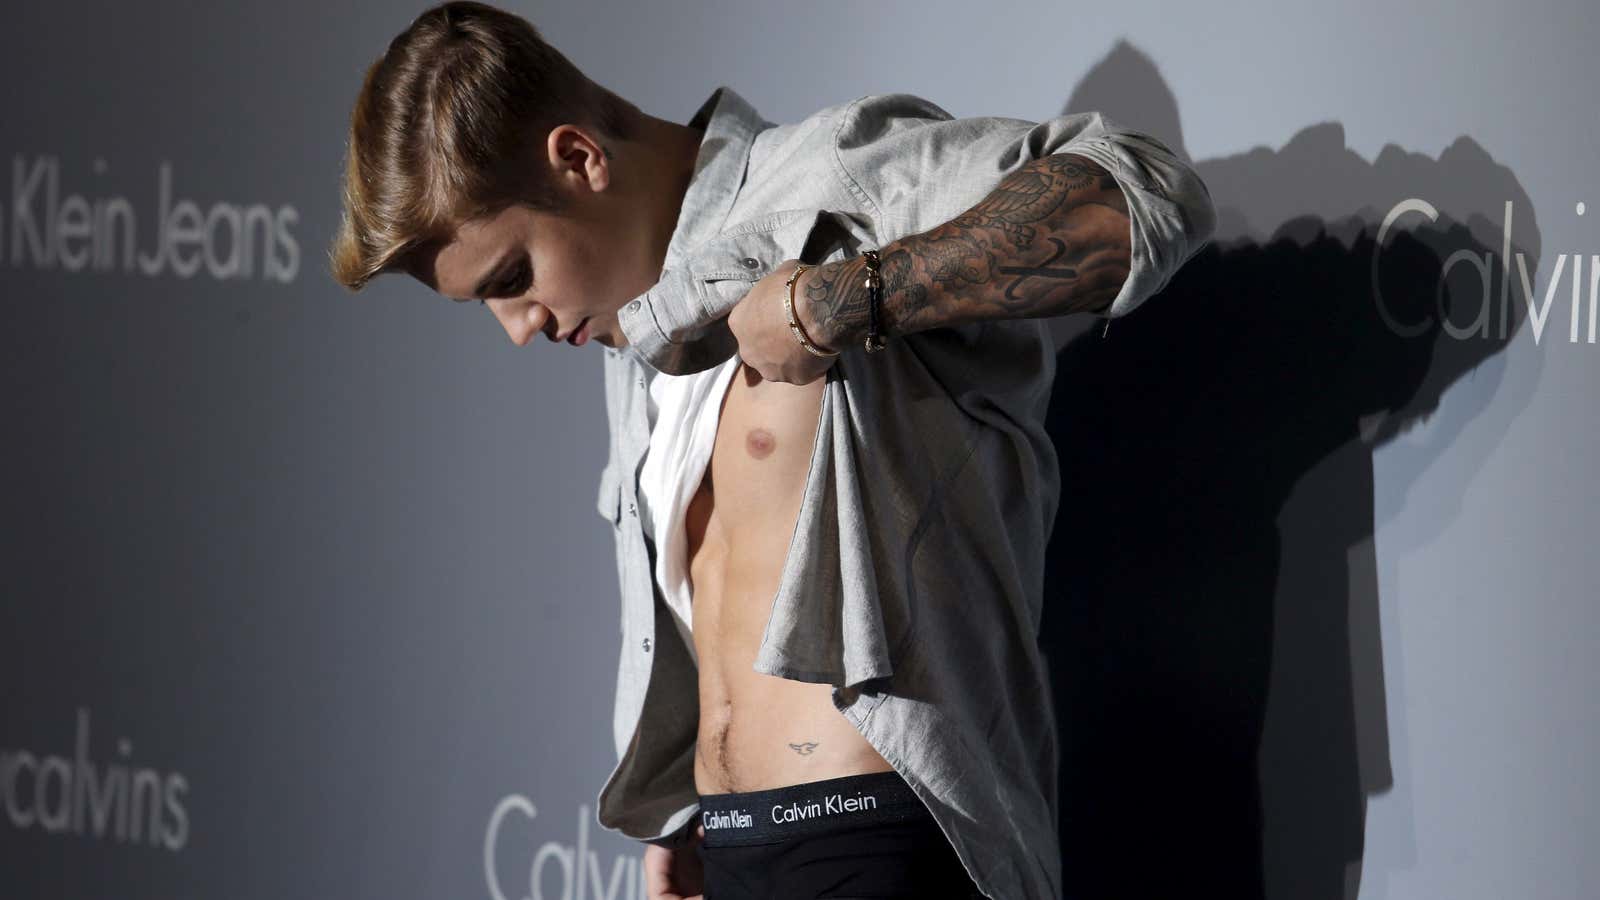 Nothing gets between Bieber and his Calvins.